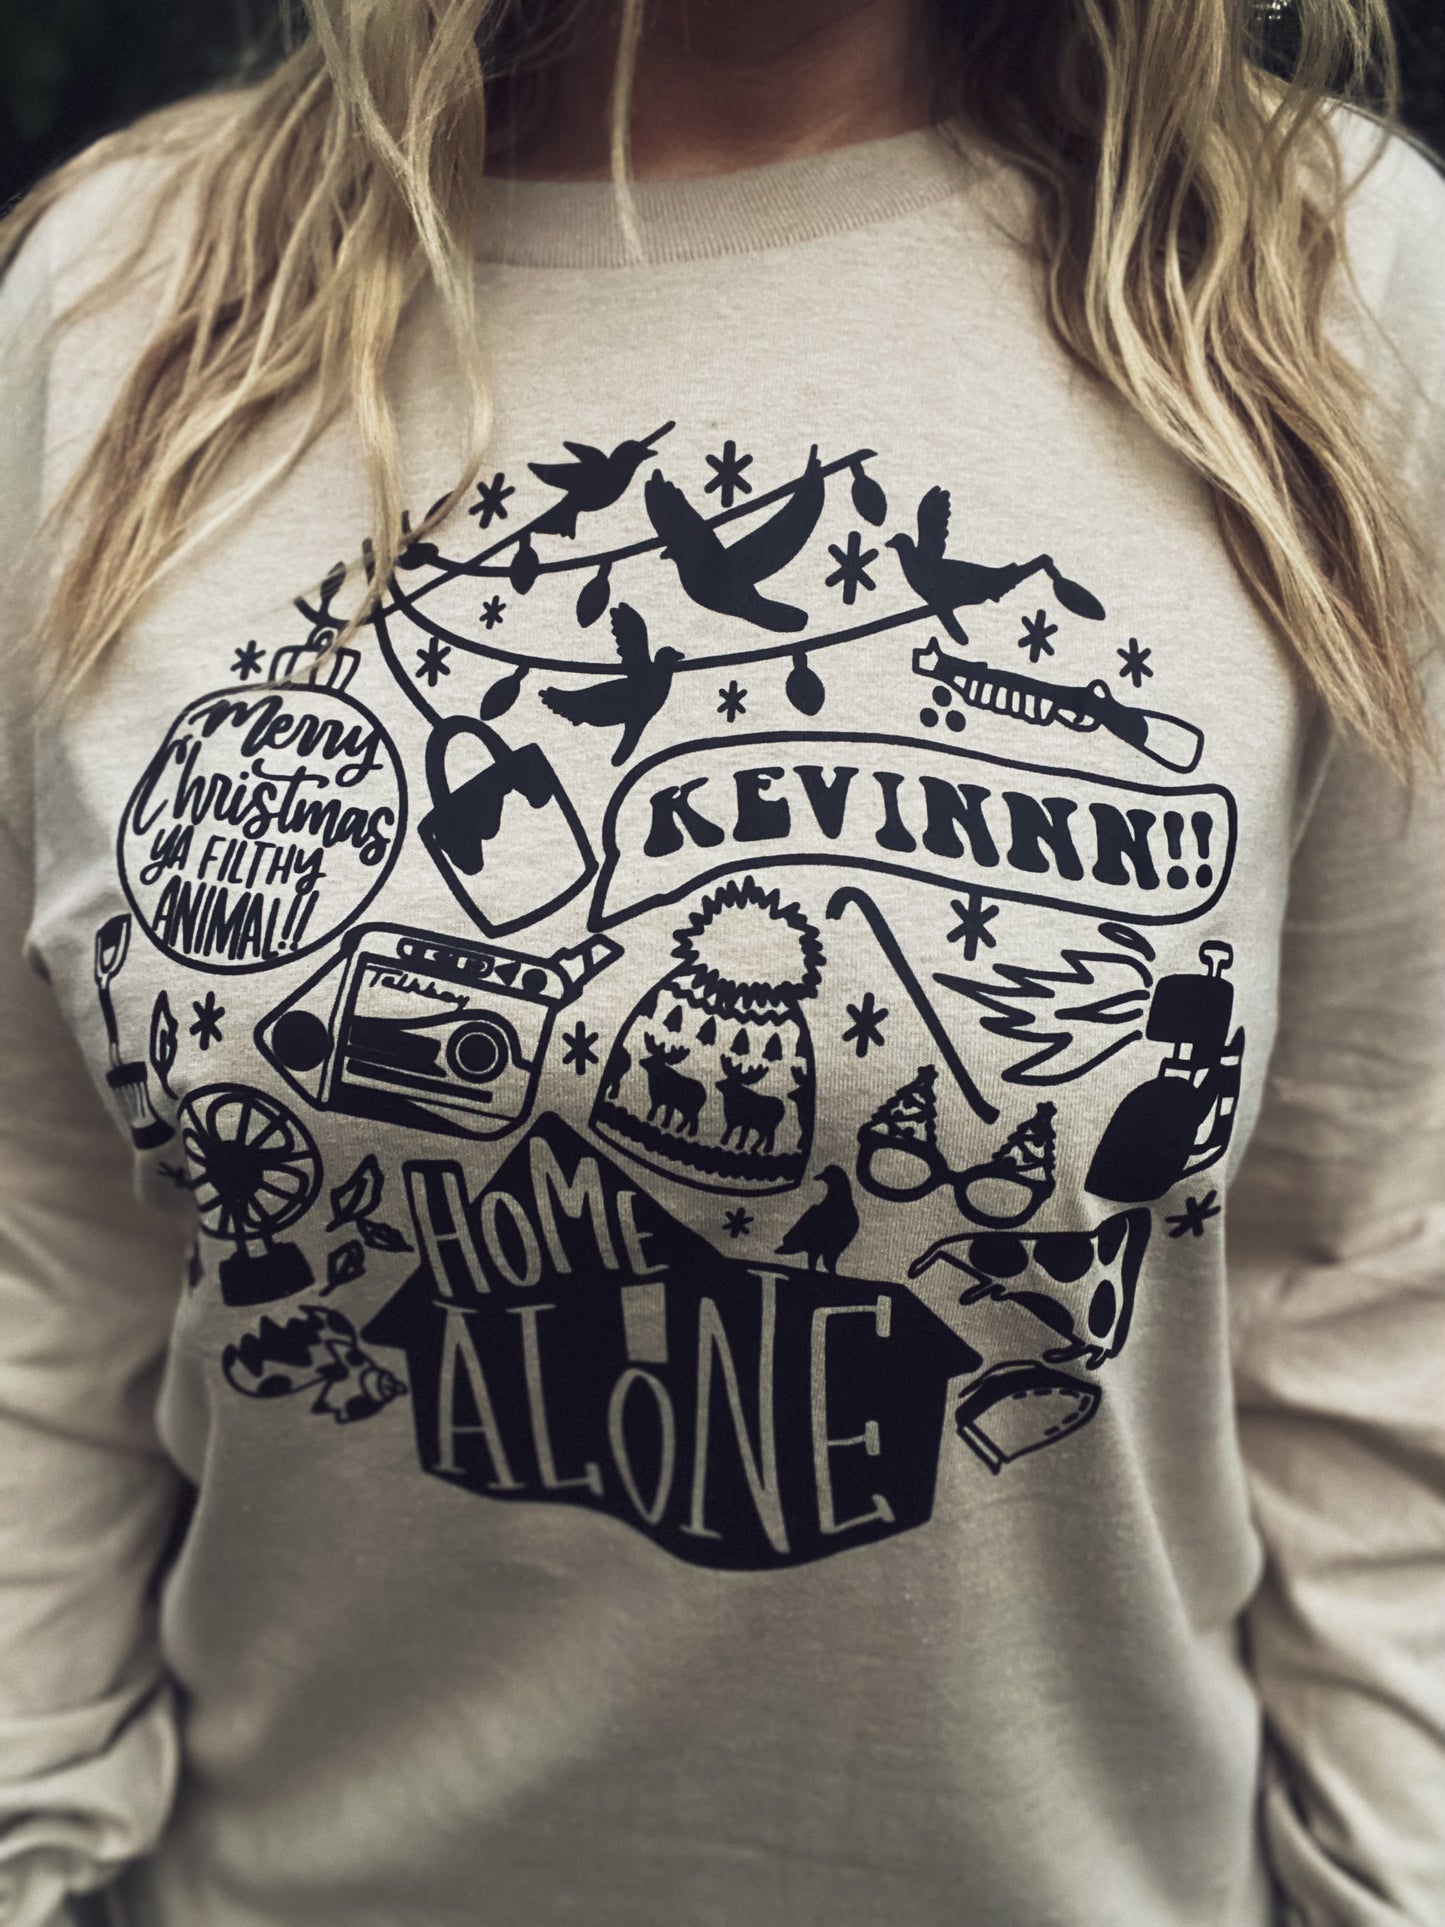 Long Sleeve Home Alone Collage Graphic Tee S-3XL